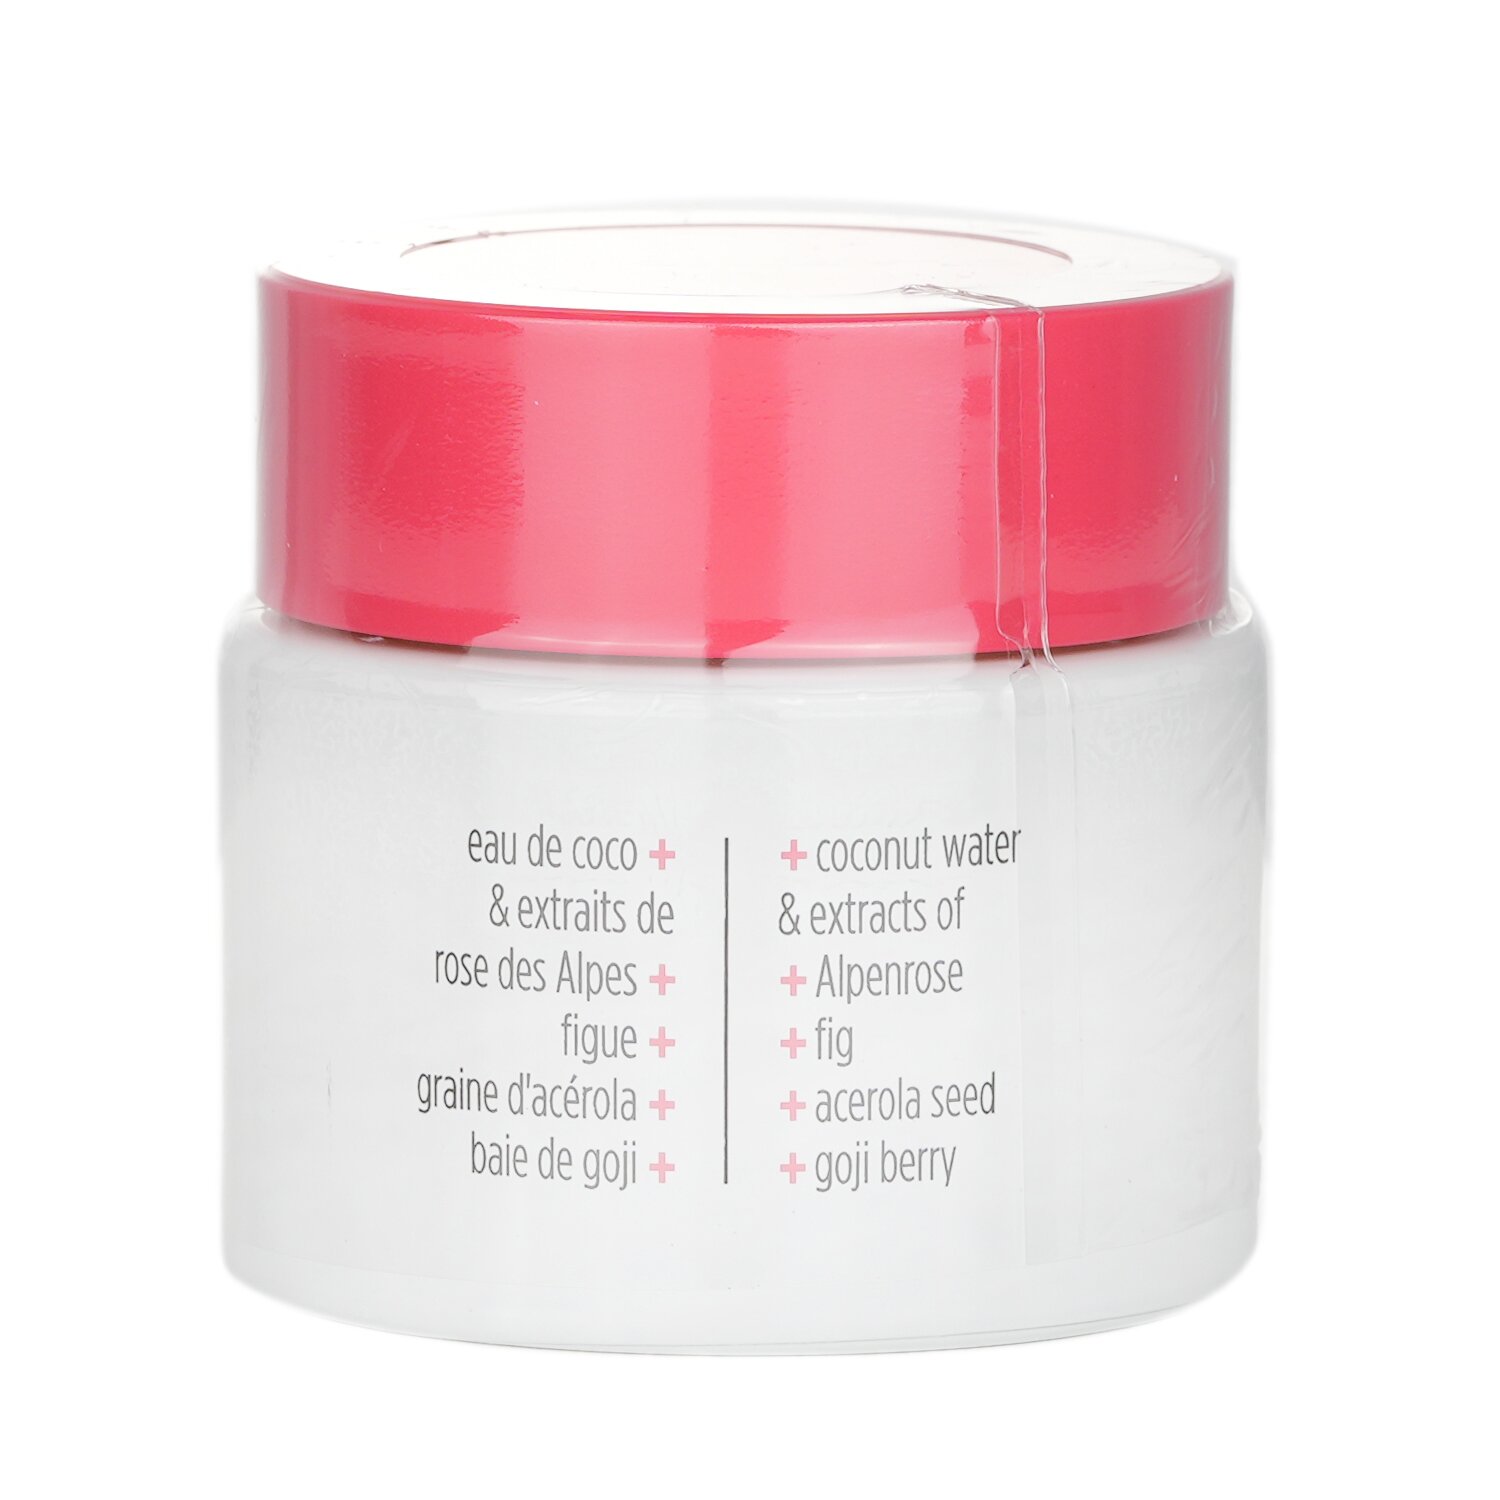 Clarins My Clarins Re-Boost Comforting Hydrating Cream - For Dry & Sensitive Skin 50ml/1.7oz